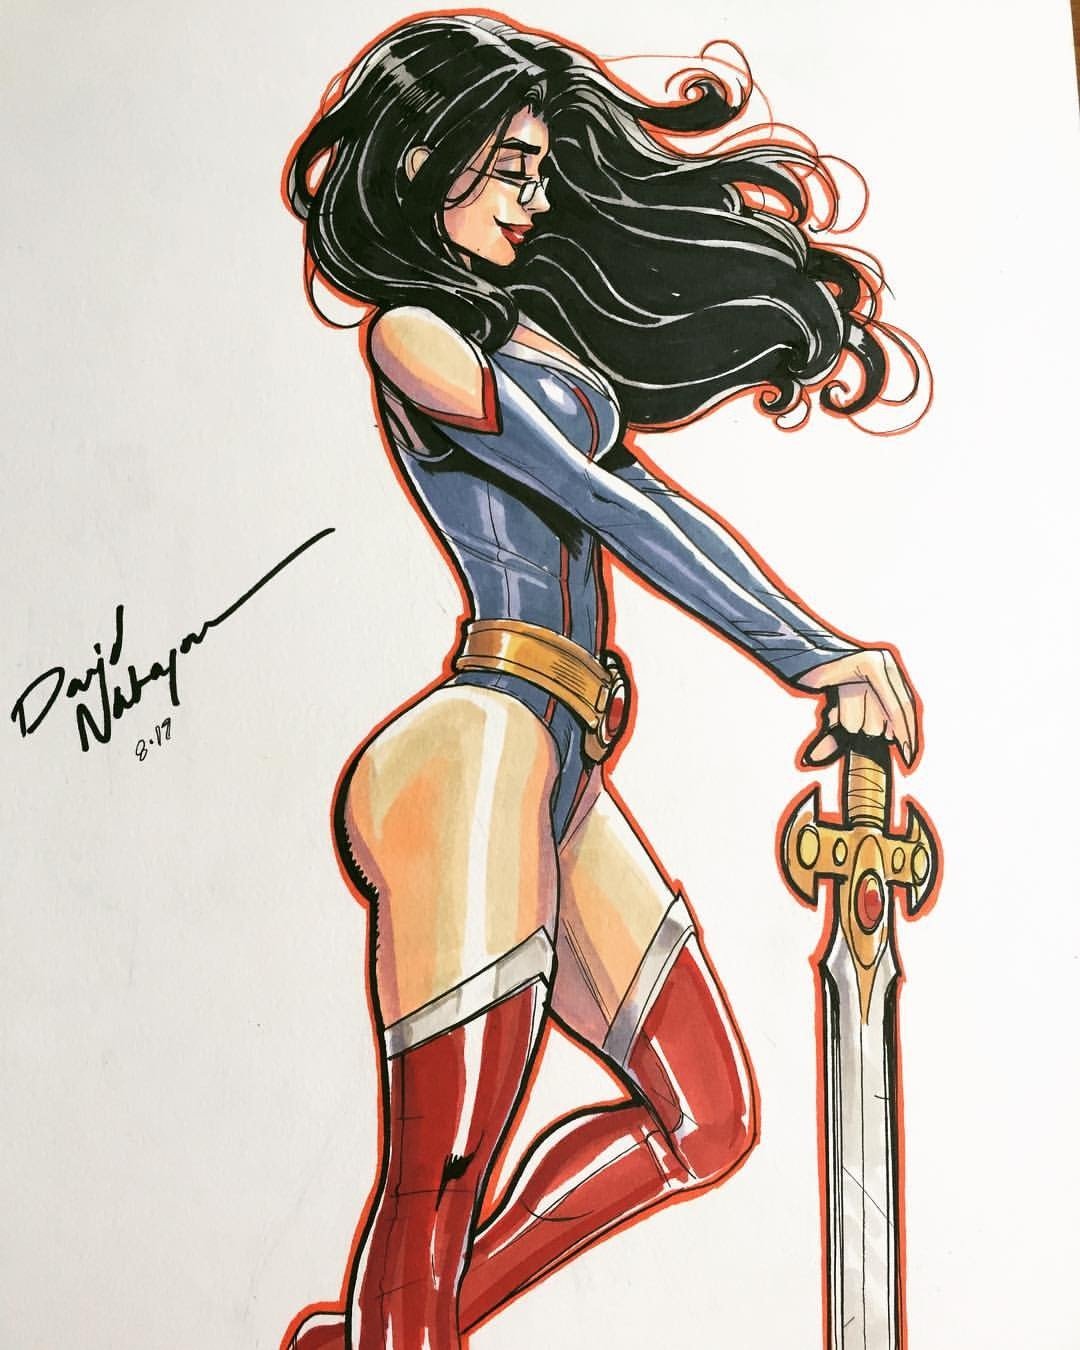 Watch the Photo by Justanotherguy with the username @Justanotherguy79, posted on October 6, 2017 and the text says 'dna-1:

Sela from Grimm Fairy Tales. Marker commission from @tampabaycomiccon last weekend. #sela #grimm #gft #davidnakayama #grimmfairytales #zenescope @zenescope'